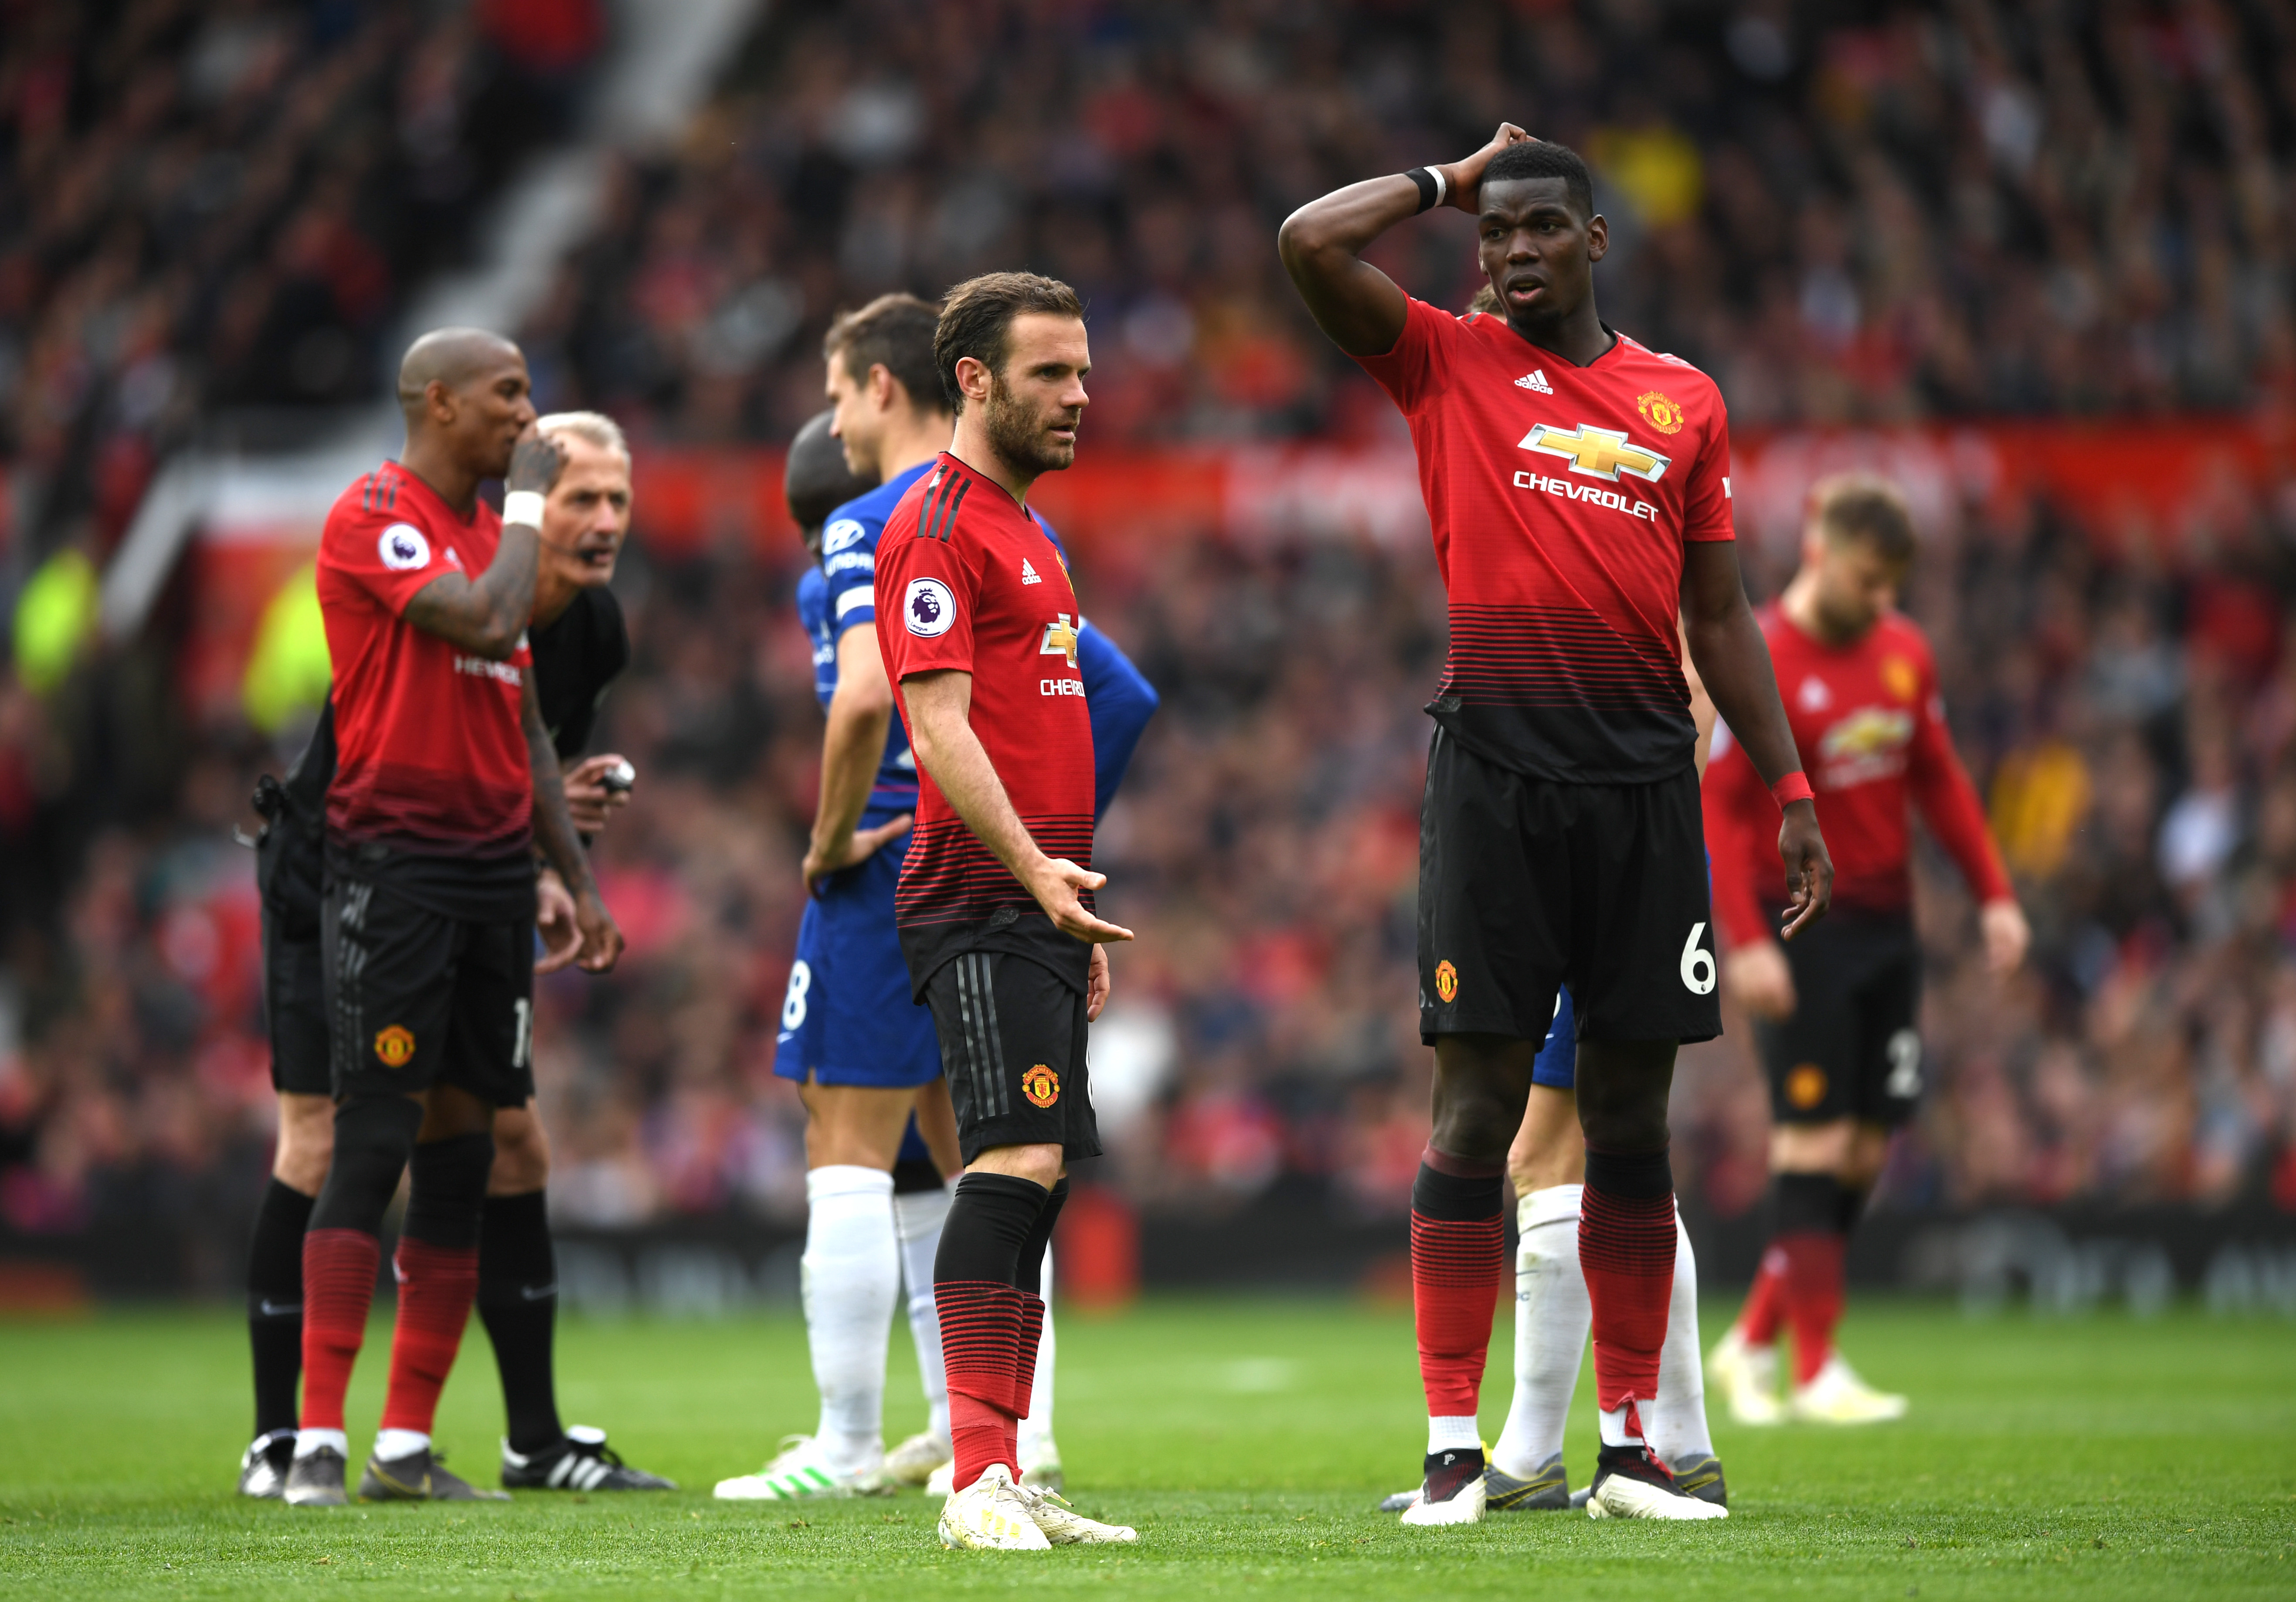 MANCHESTER, ENGLAND - APRIL 28:  Paul Pogba and Juan Mata of Manchester United in discussion during the Premier League match between Manchester United and Chelsea FC at Old Trafford on April 28, 2019 in Manchester, United Kingdom. (Photo by Shaun Botterill/Getty Images)